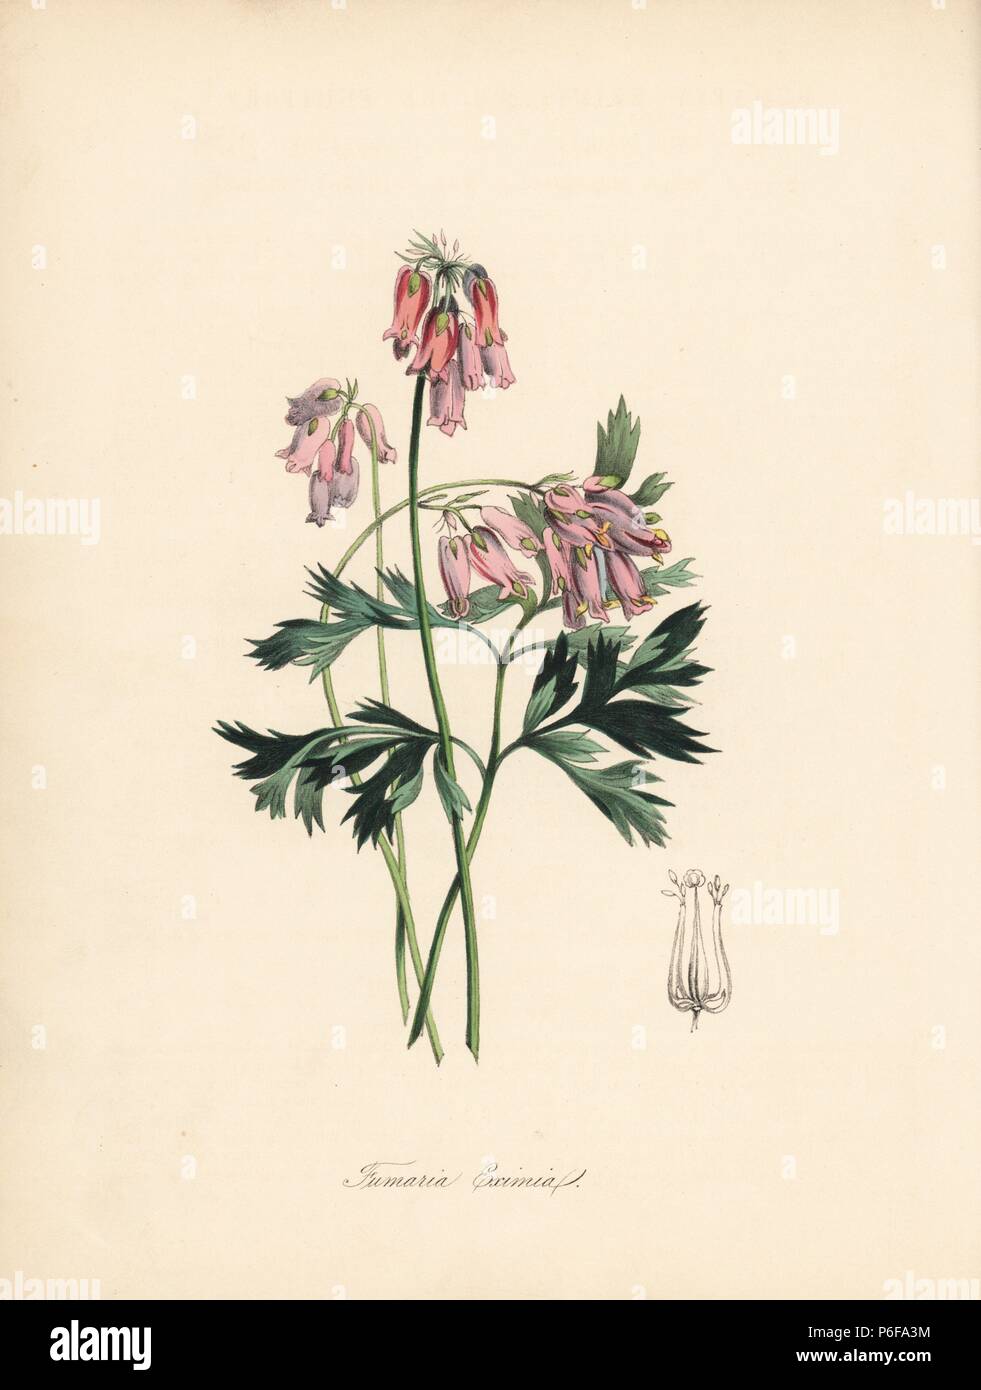 Wild or fringed bleeding-heart or turkey-corn, Dicentra eximia (Choice fumitory, Fumaria eximia). After an illustration by William Clark from Richard Morris's 'Flora Conspicua.' Handcoloured zincograph by C. Chabot drawn by Miss M. A. Burnett from her 'Plantae Utiliores: or Illustrations of Useful Plants,' Whittaker, London, 1842. Miss Burnett drew the botanical illustrations, but the text was chiefly by her late brother, British botanist Gilbert Thomas Burnett (1800-1835). Stock Photo